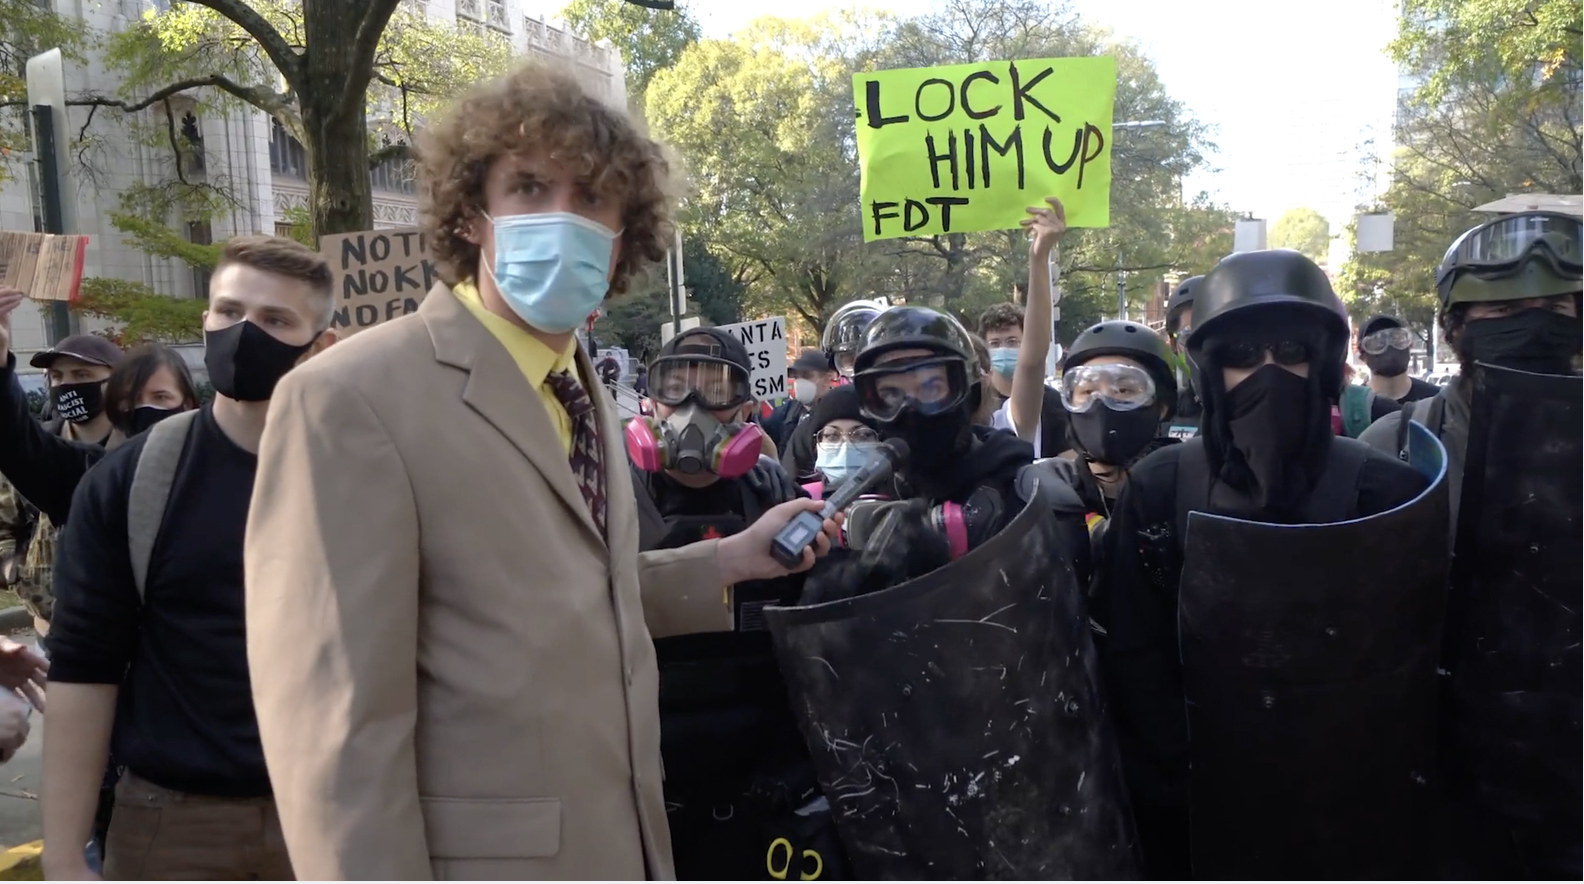 Andrew Callaghan and protesters. Image: Courtesy of HBO